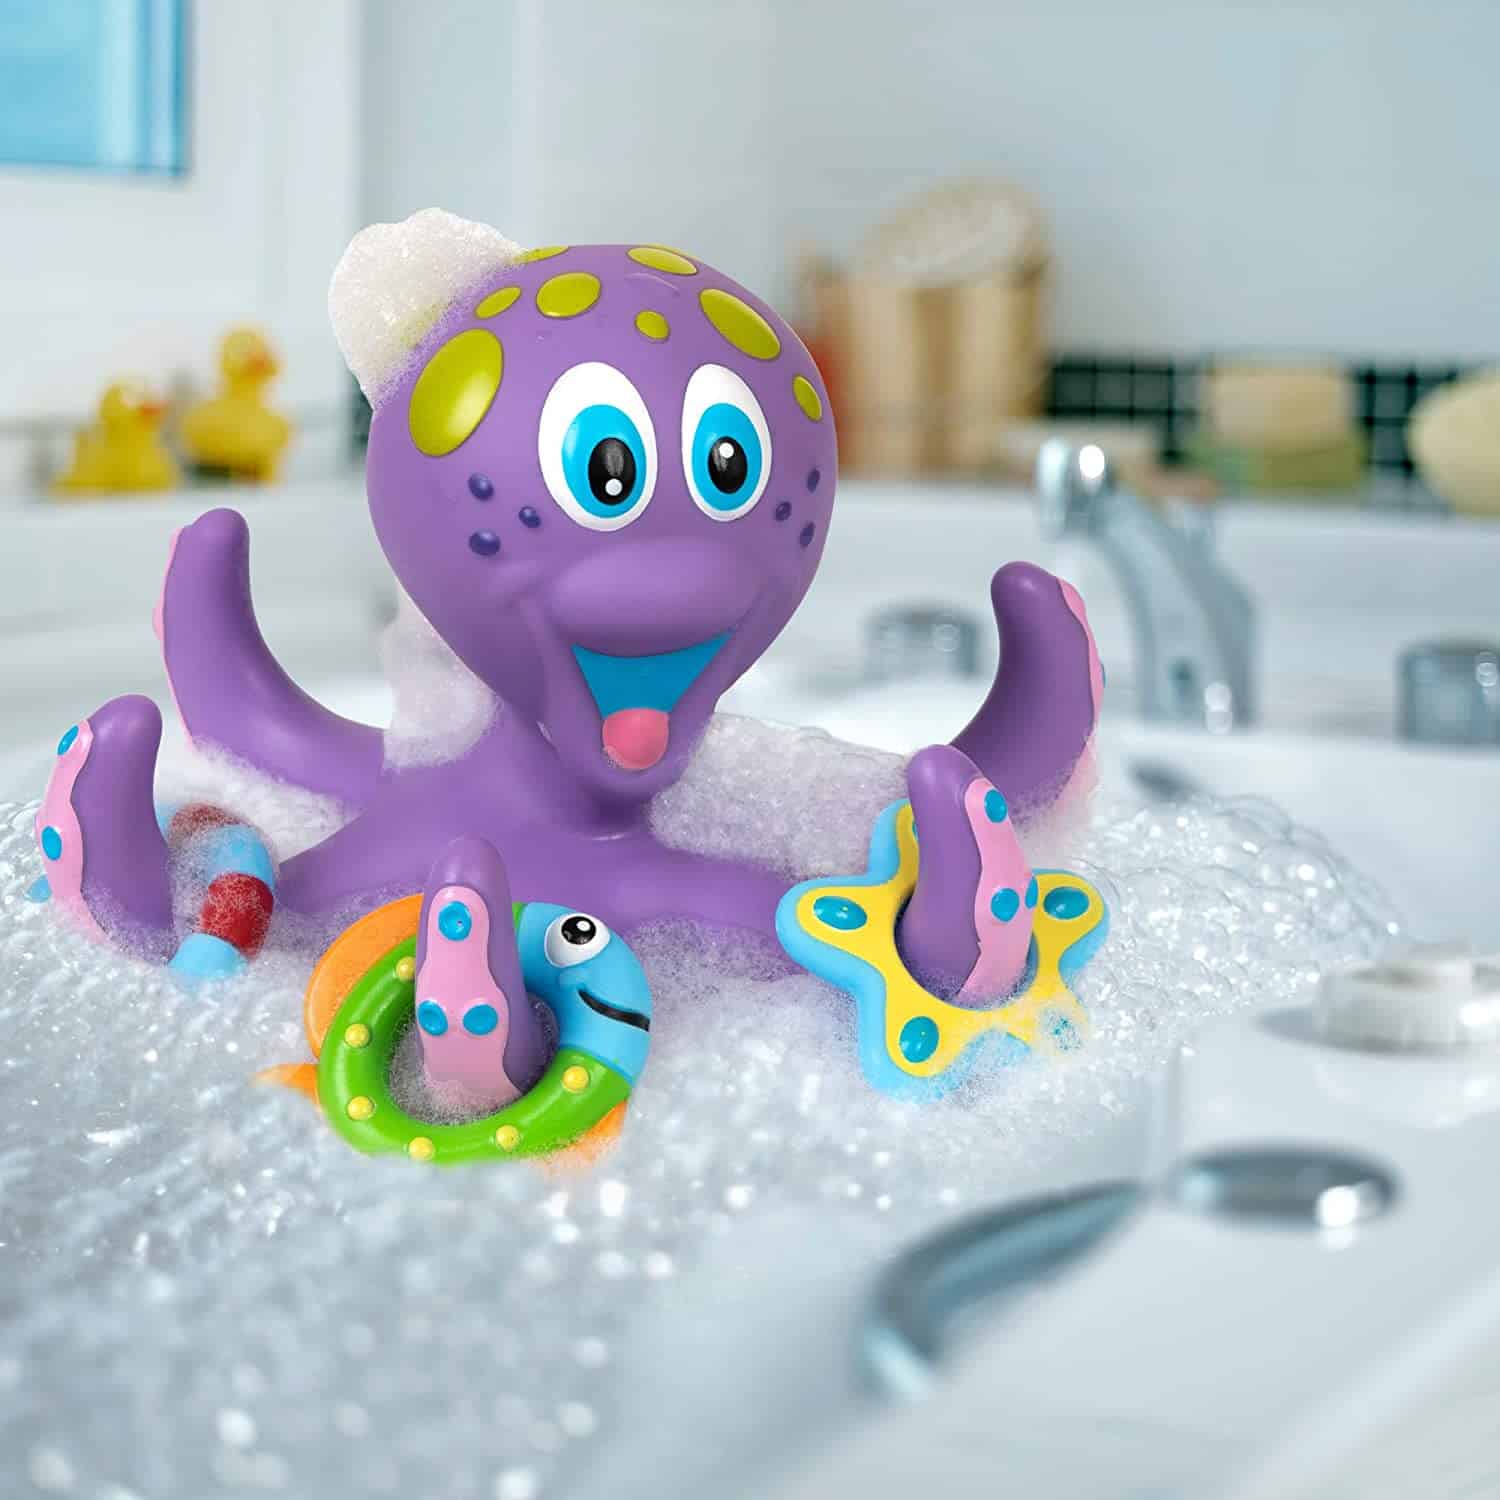 Best bath toy for hand-eye coordination: Nûby Floating Octopus